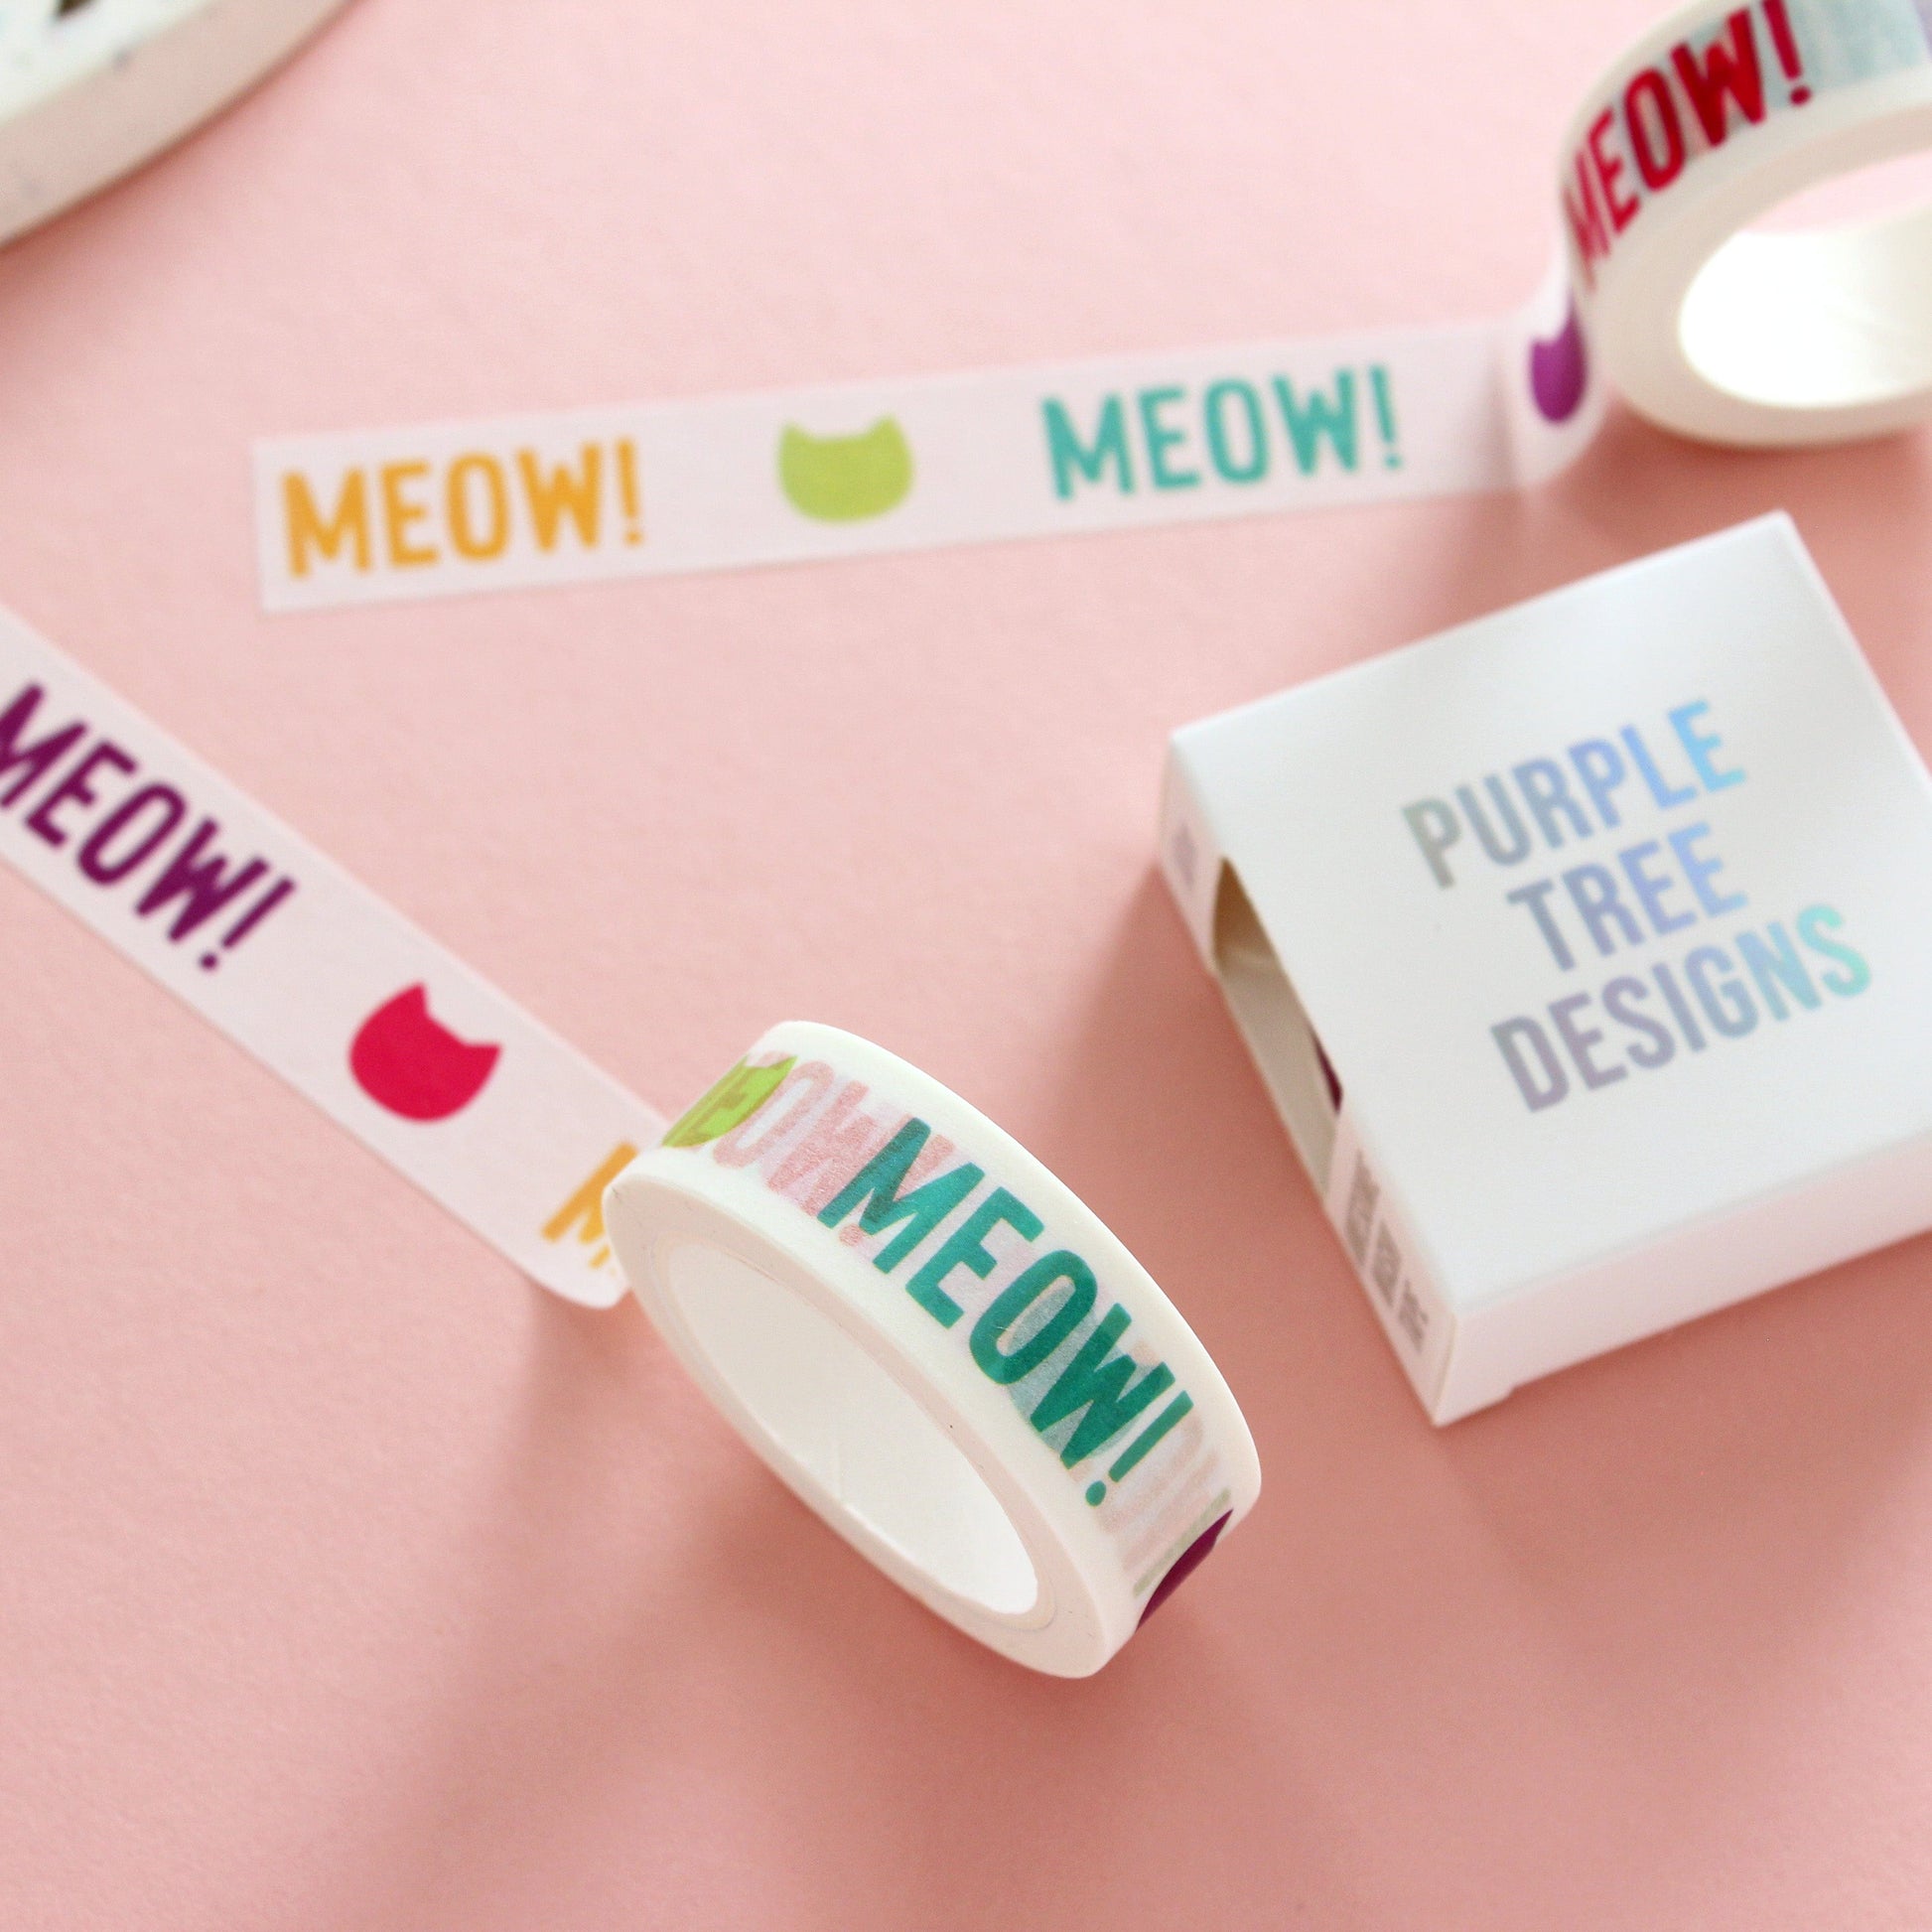 Meow cat washi tape from Purple Tree Designs